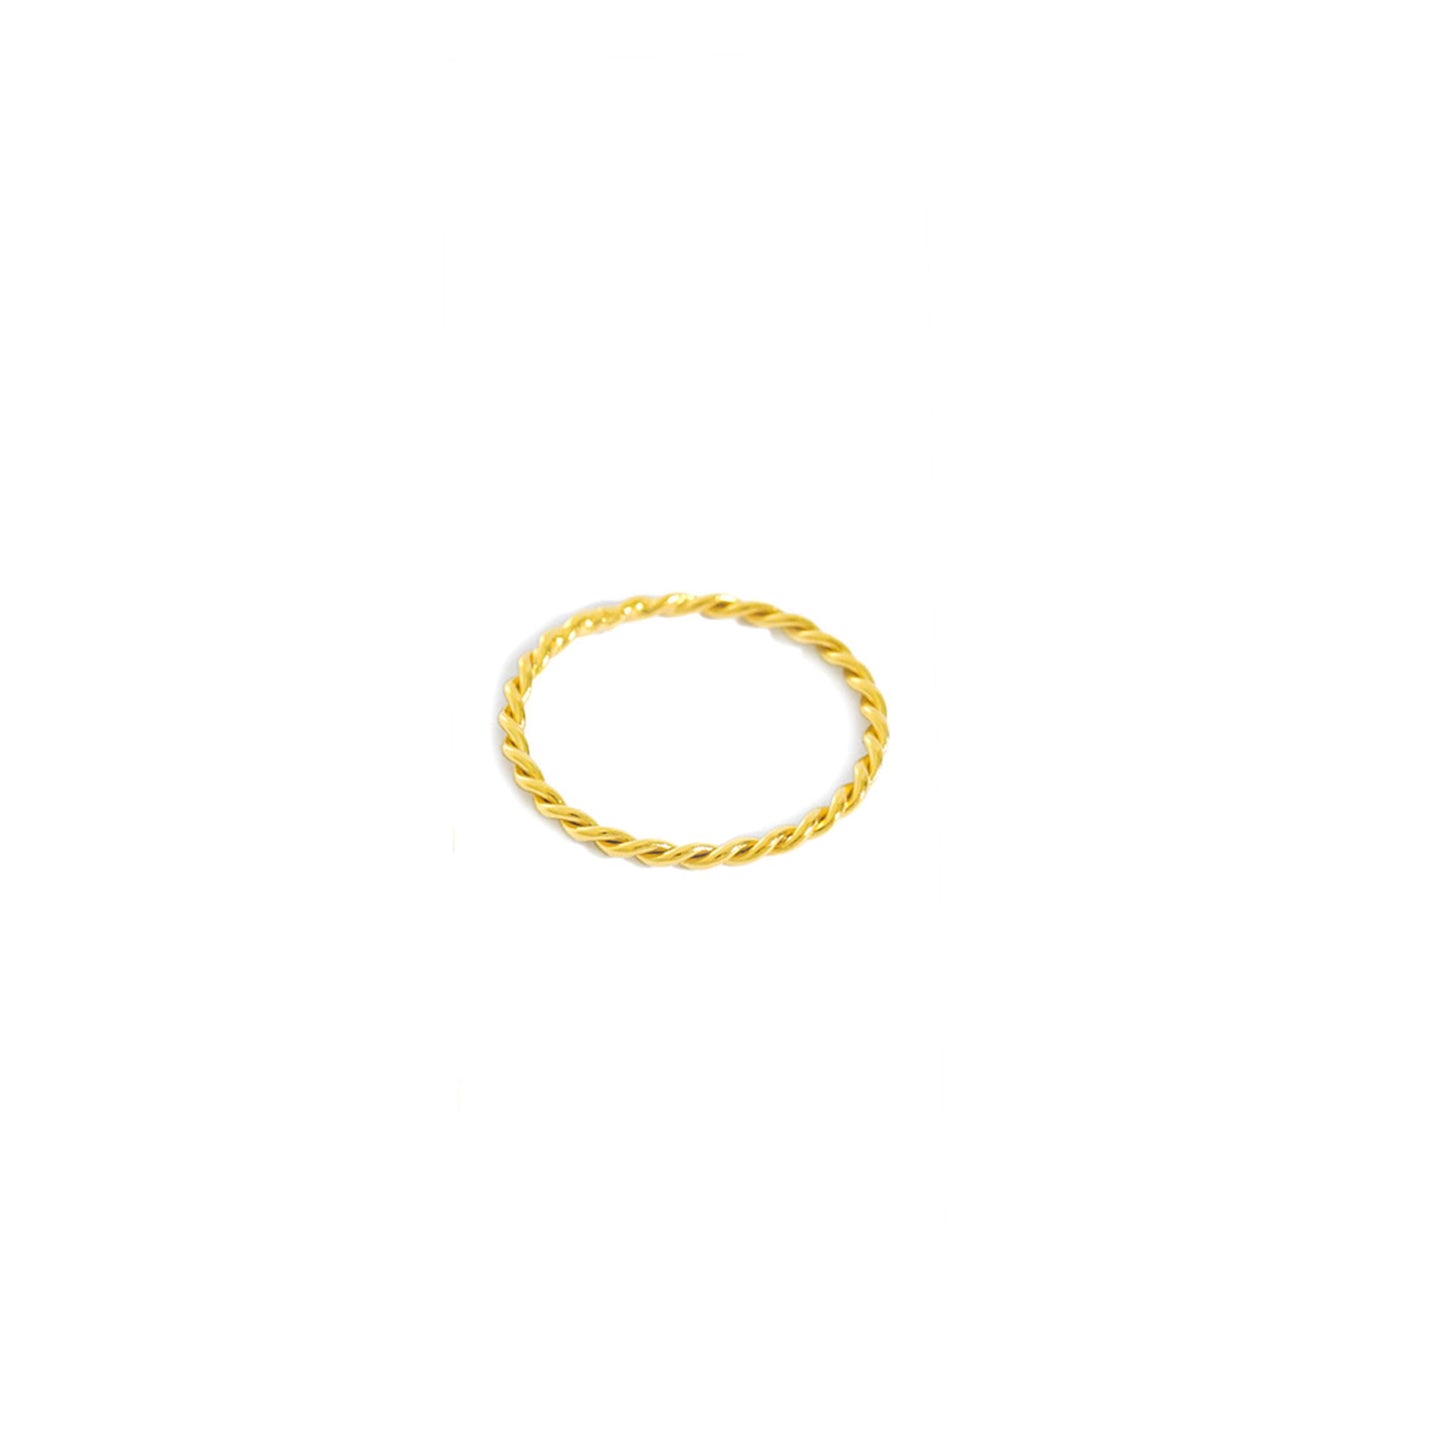 1.2 - 1.4mm Gold on Sterling Silver Twisted Spiral Band Stack Ring E1/2 - S - sugarkittenlondon